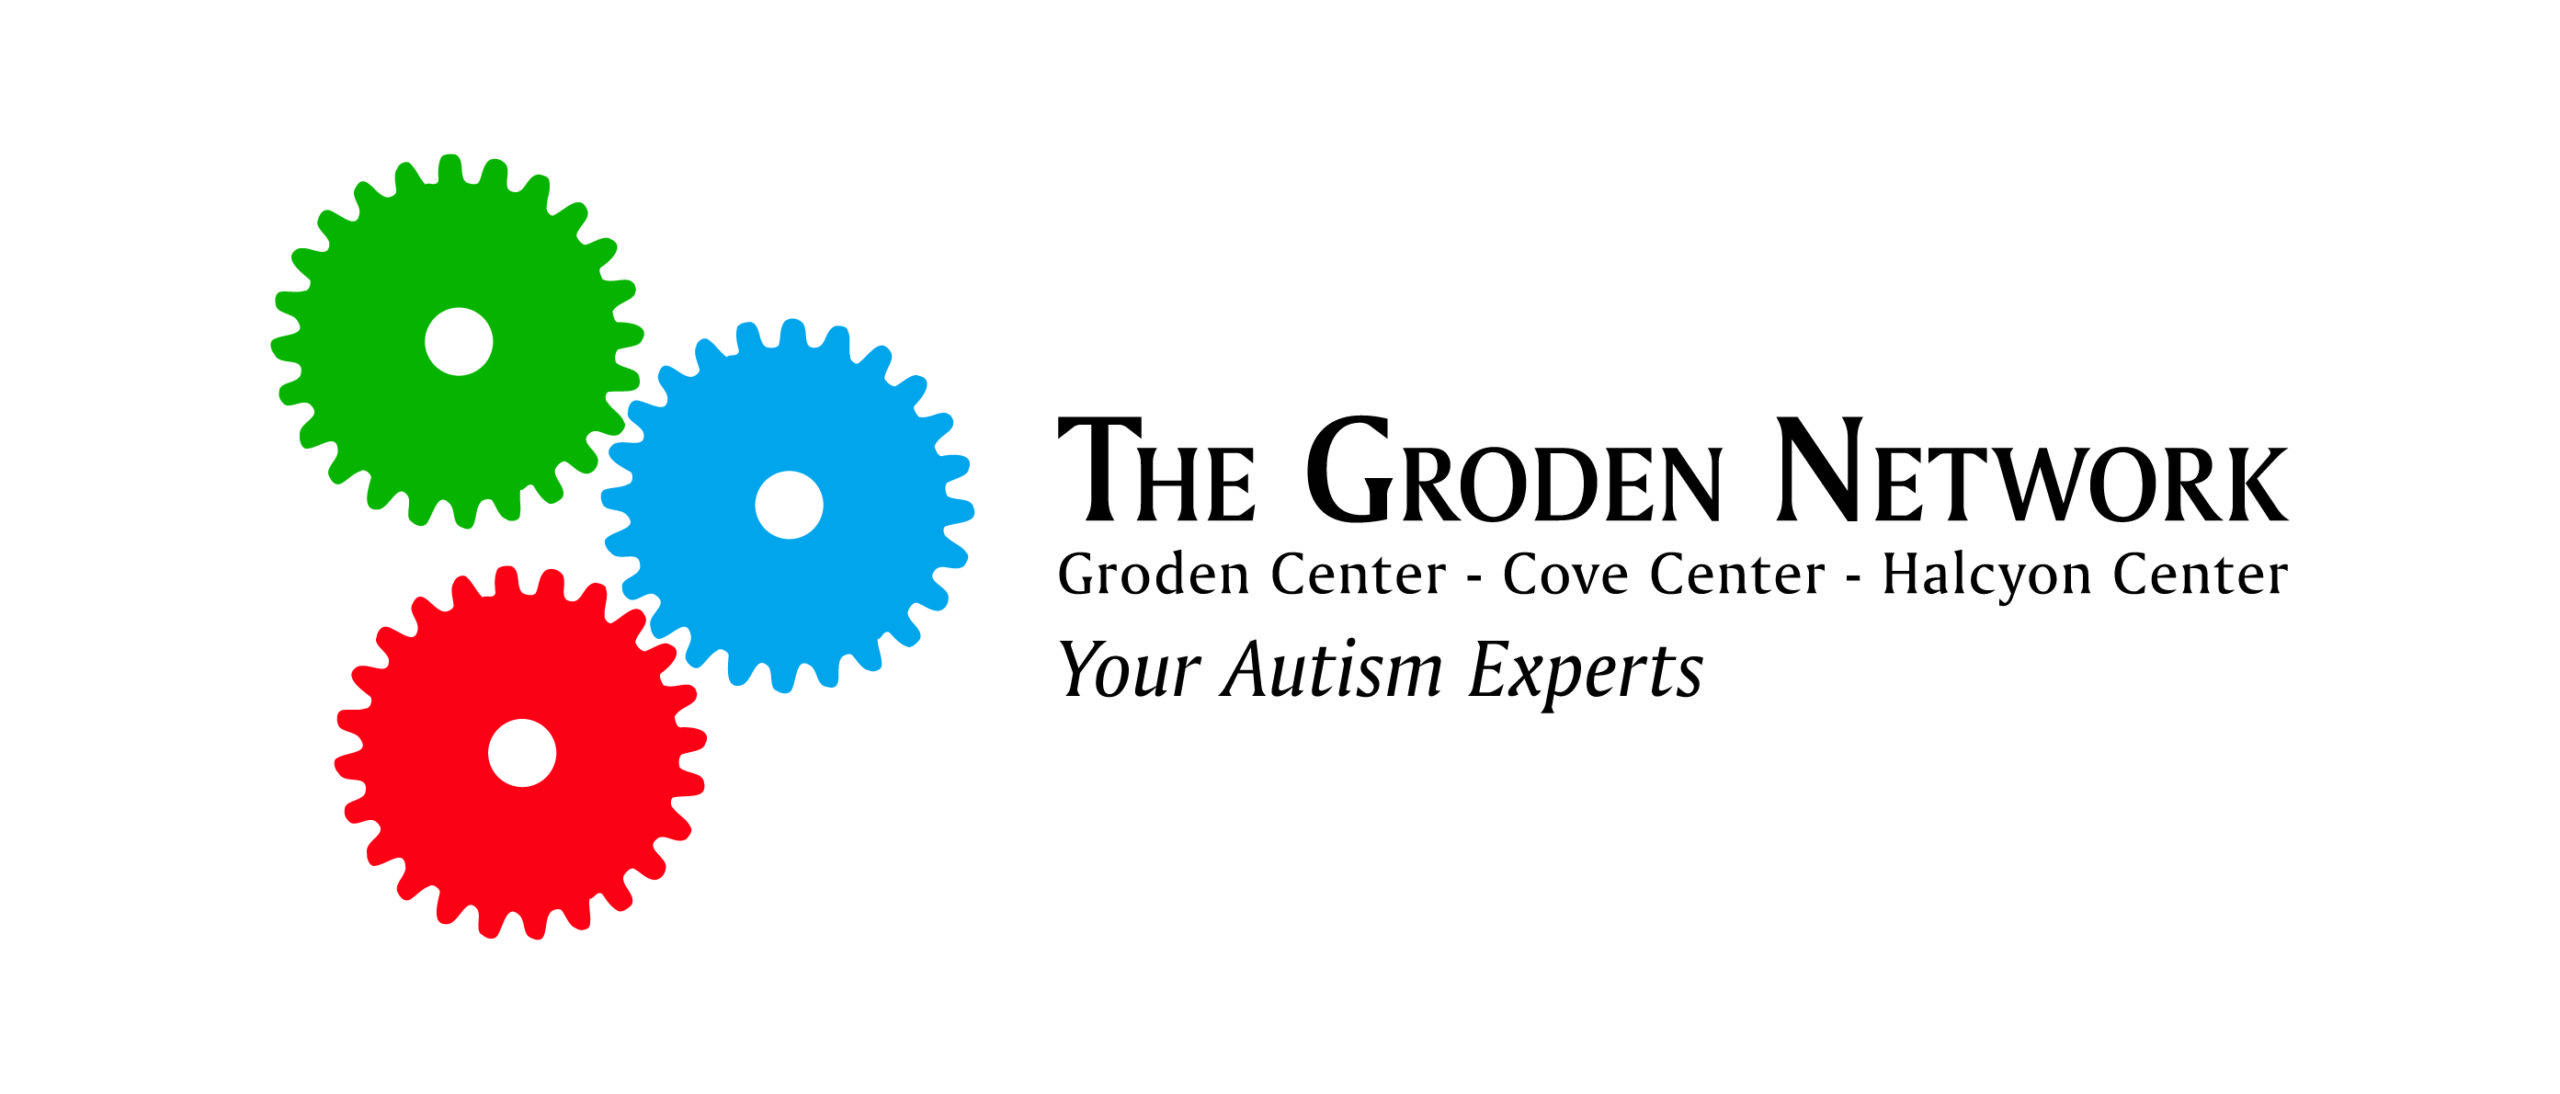 The Groden Network